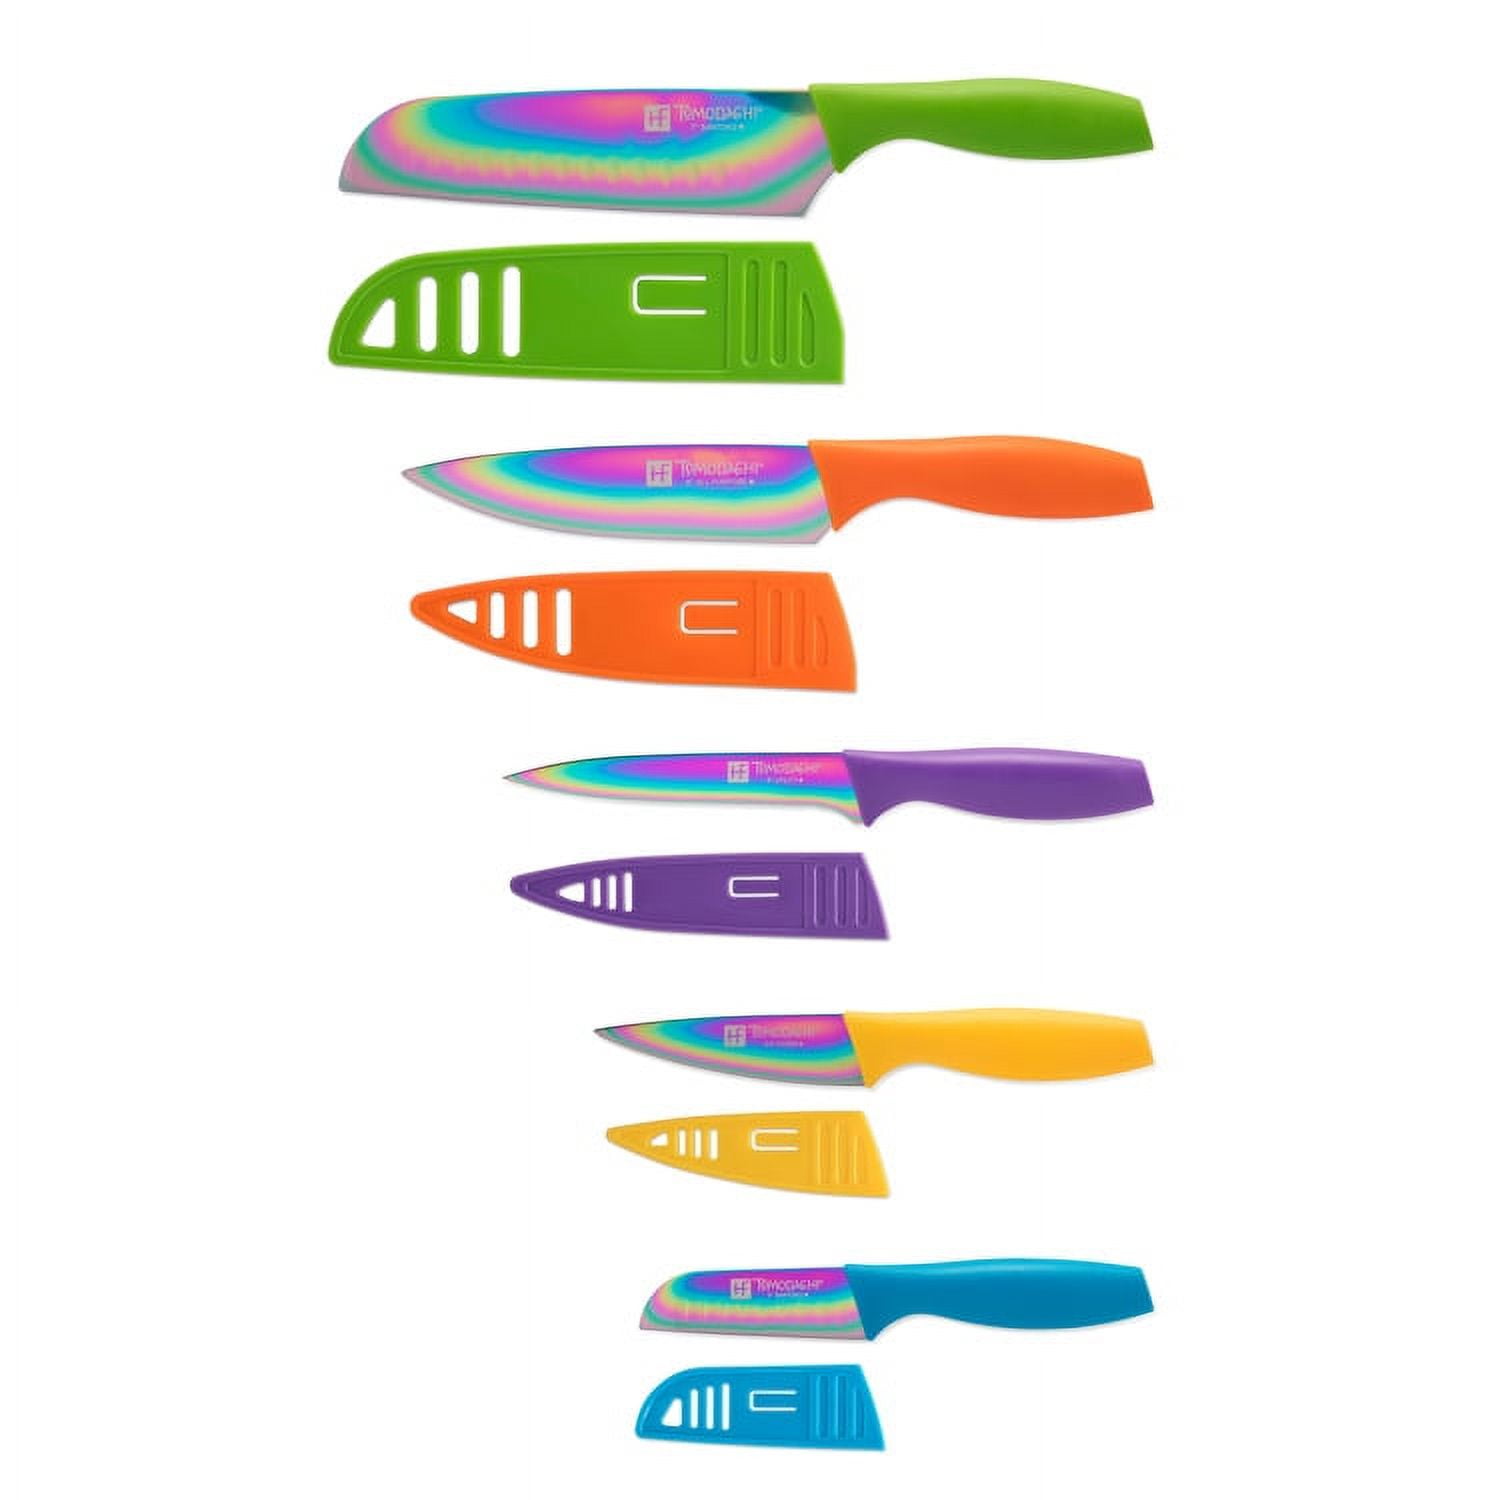 Astercook Paisley Pattern Knife Set with Cover, Dishwasher Safe Colorful  Knives with 6 Knife Sheath, German Stainless Steel Rainbow Knife Set